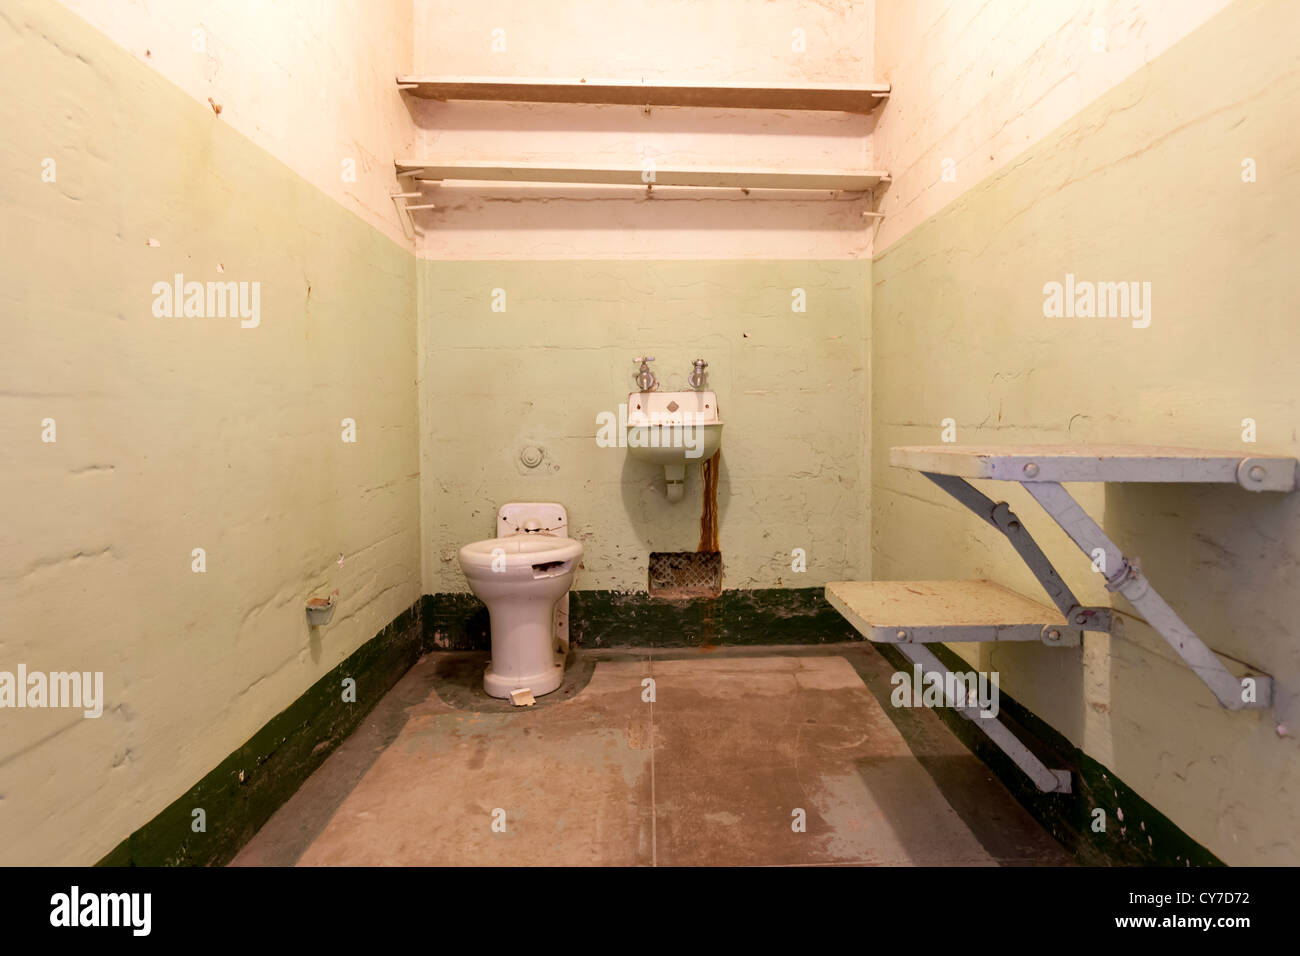 A view of Alcatraz Federal Prison Inmate Cell. Stock Photo